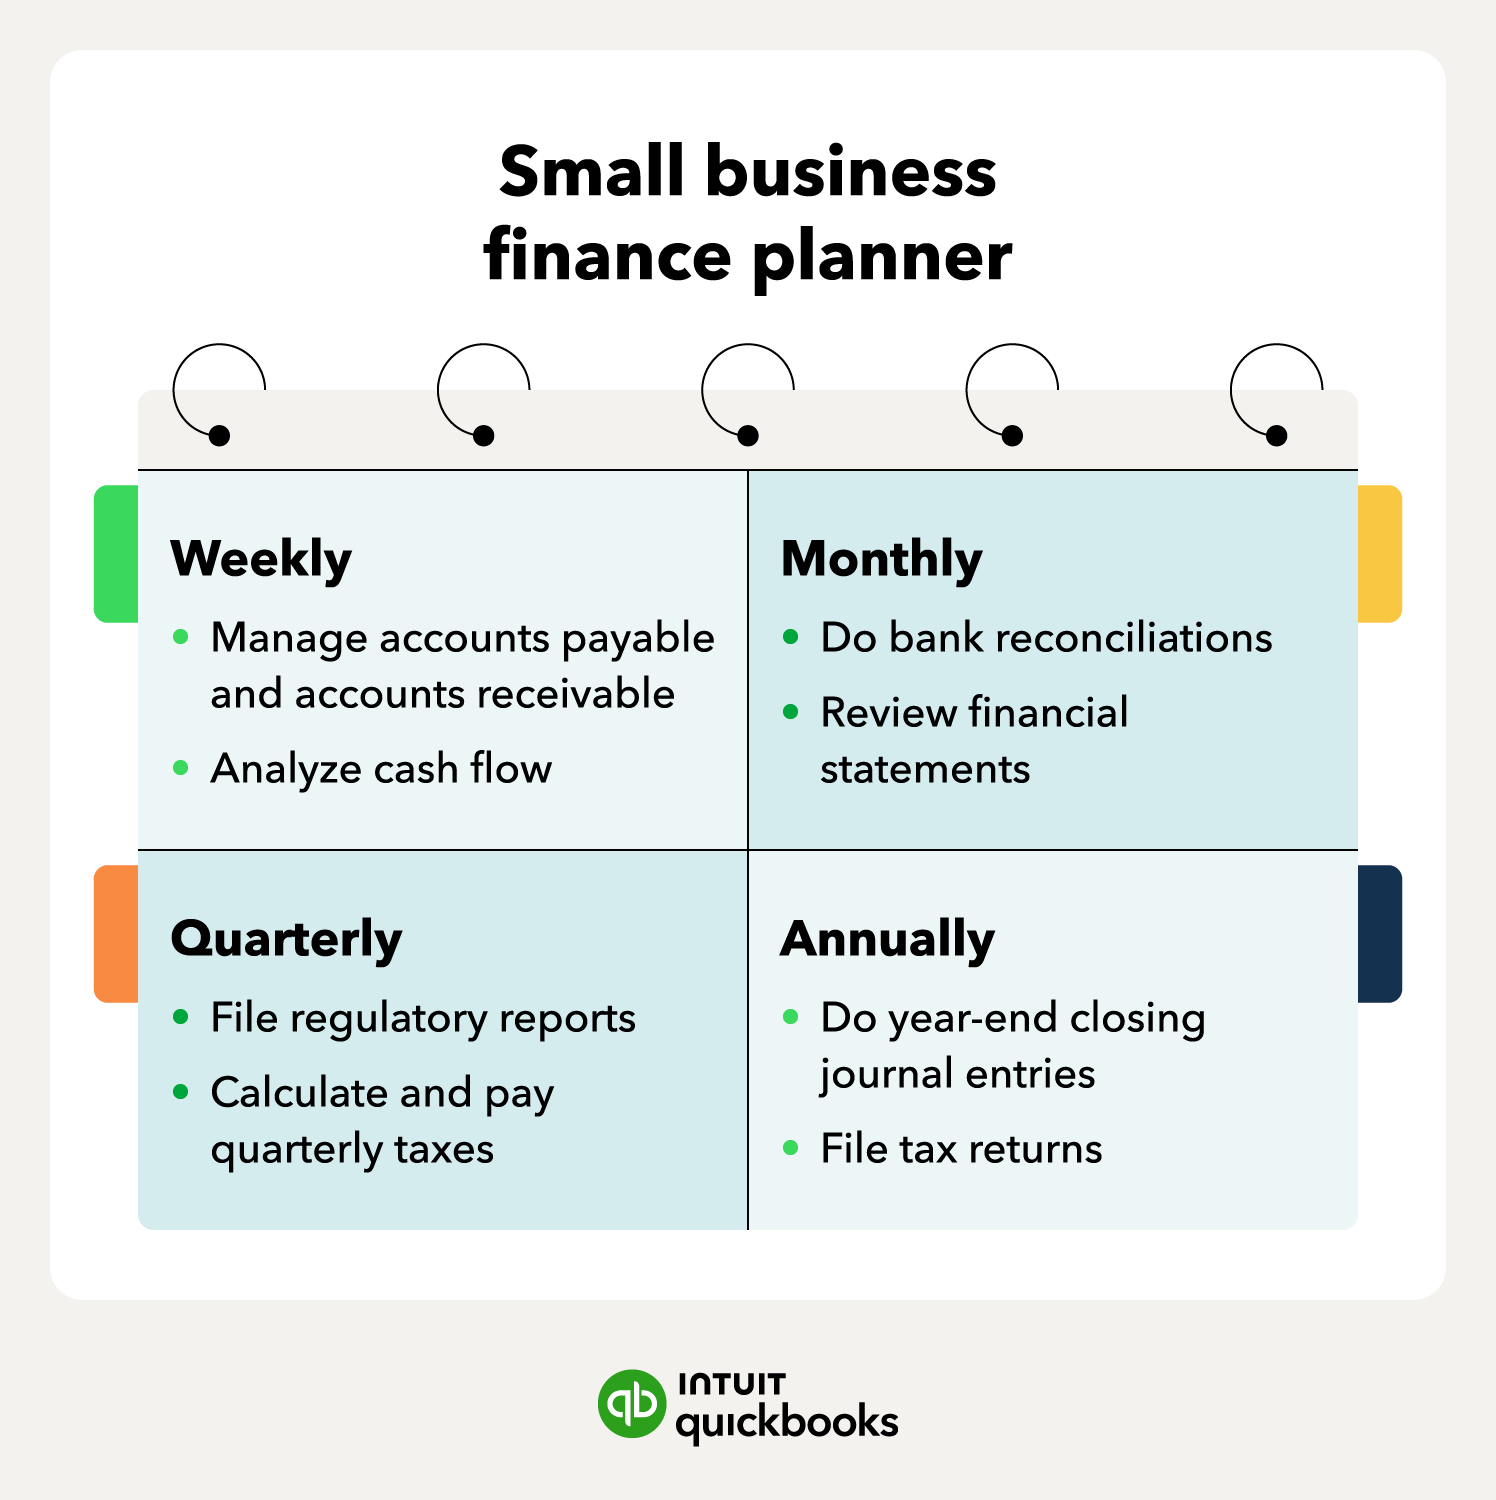 An illustration of a small business finance planner for weekly, monthly, quarterly, and annual actions.